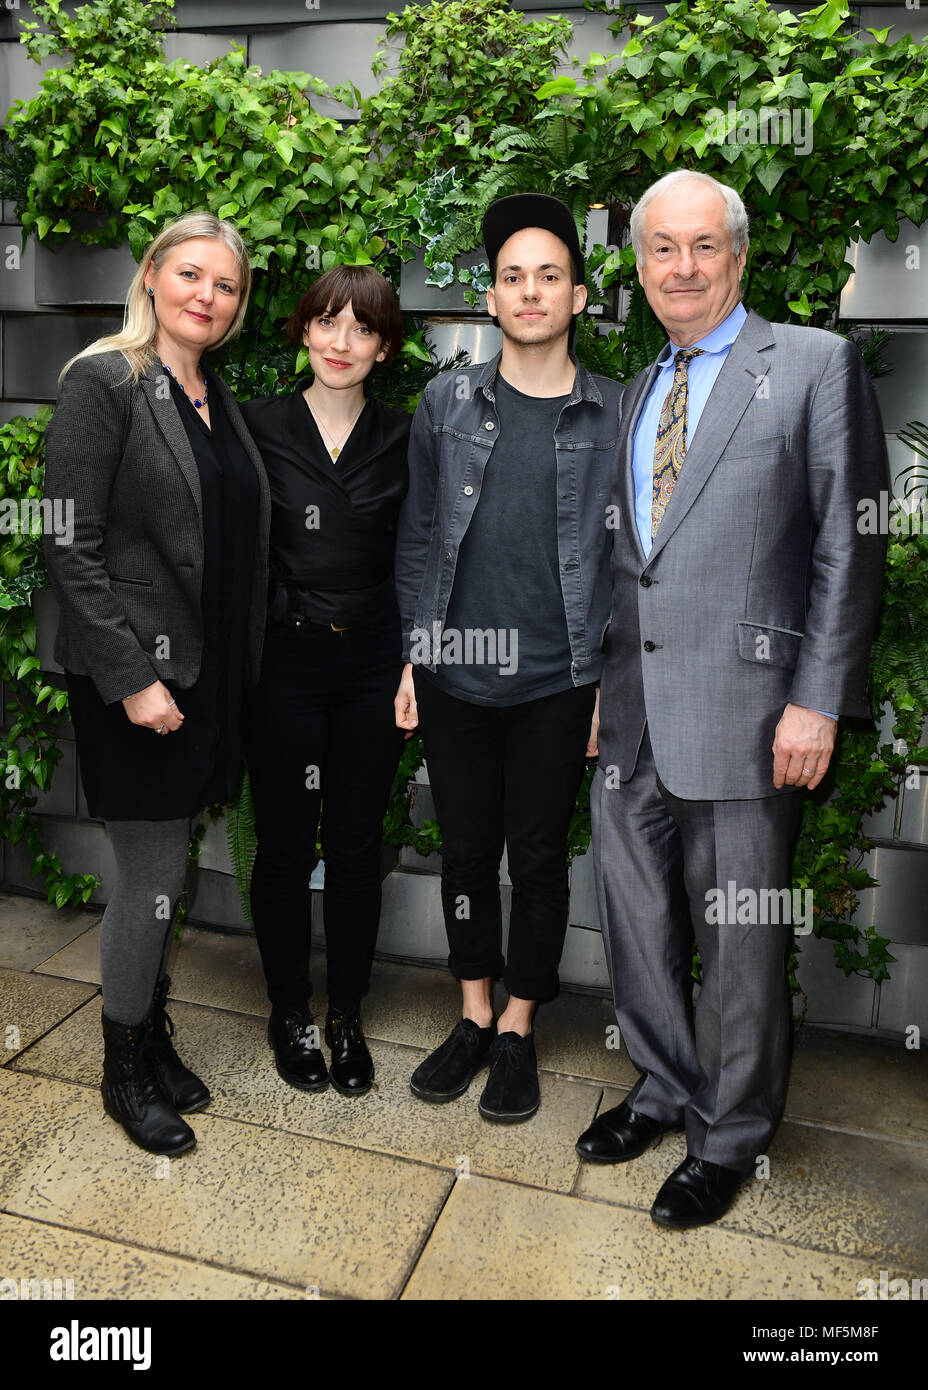 Vick Bain, Elena Tonra and Igor Haefeli of Daughter, and Host Paul  Gambaccini at the Nominations Announcement for the 63rd Ivor Novello  Awards. Daughter is nominated for Best Original Video Game score.